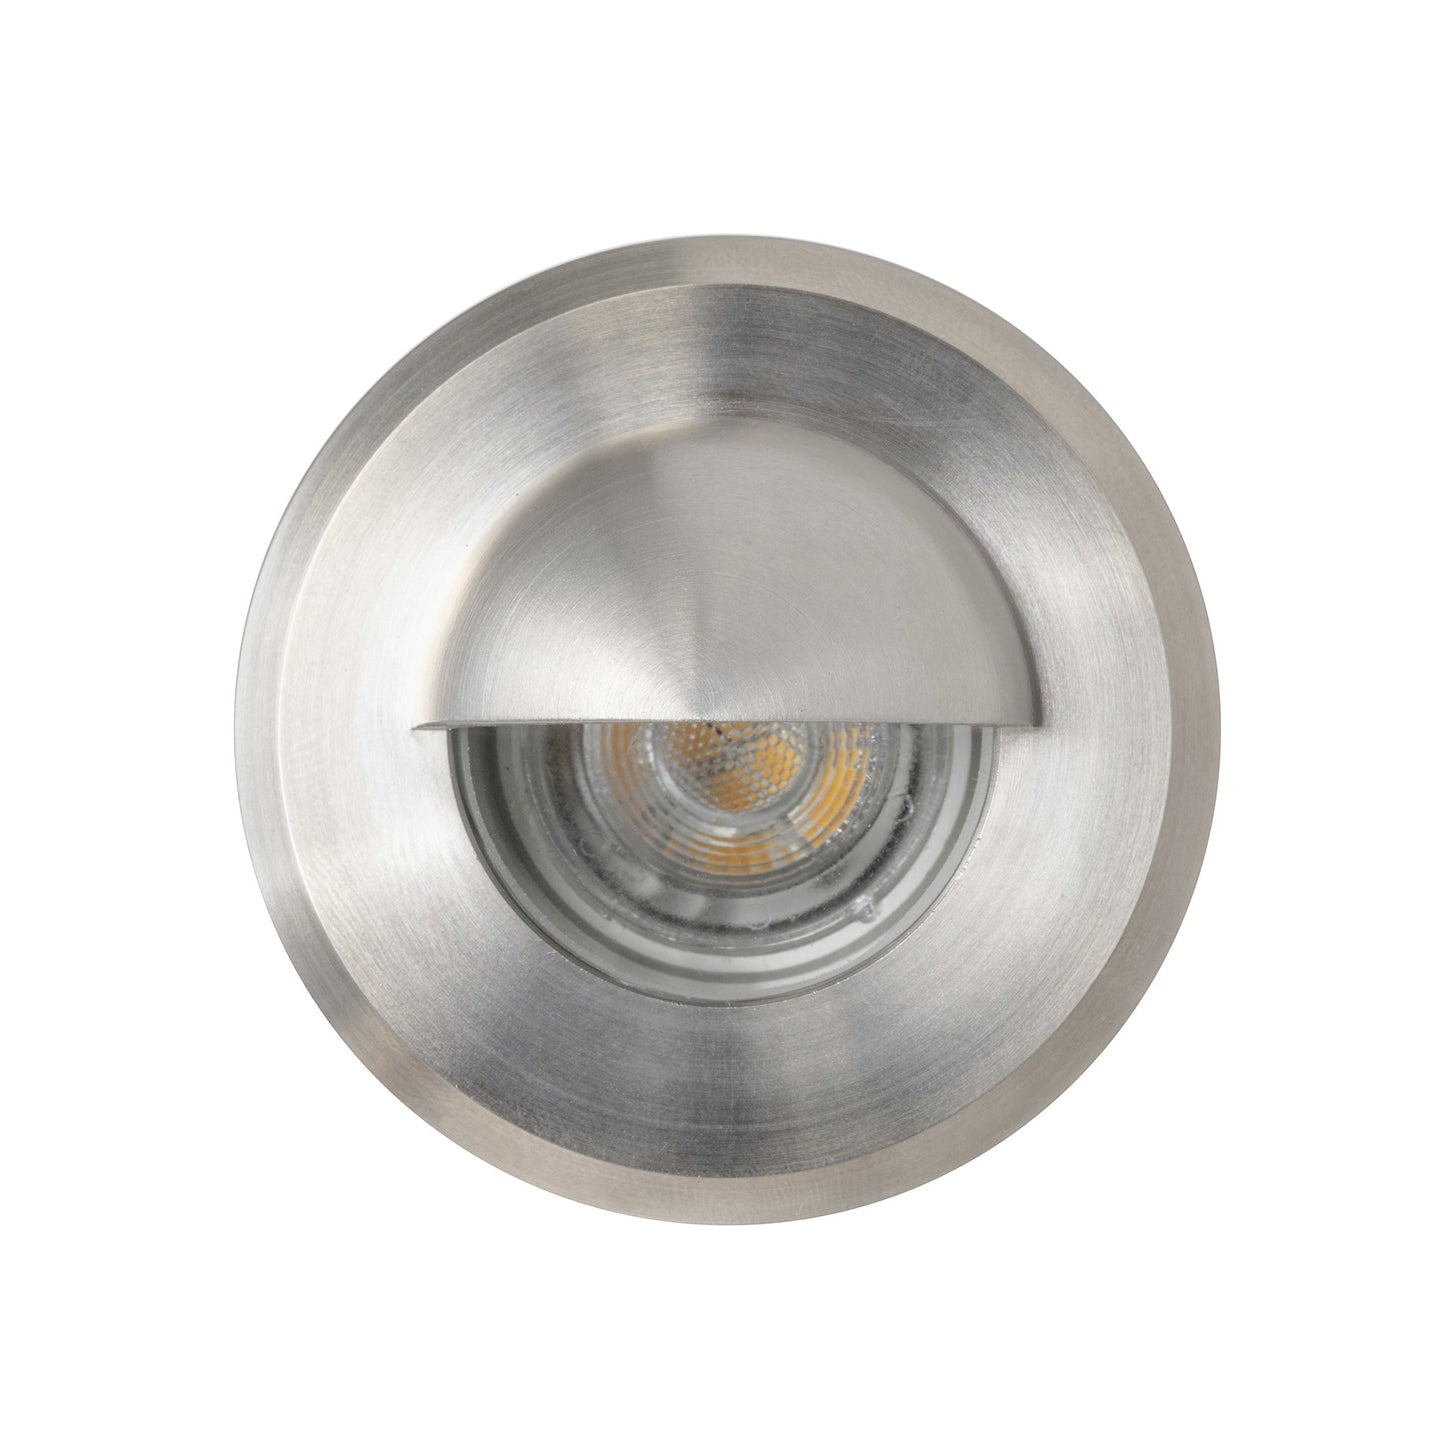 Mini Recessed Step Light with Eyelid 316 Stainless Steel 